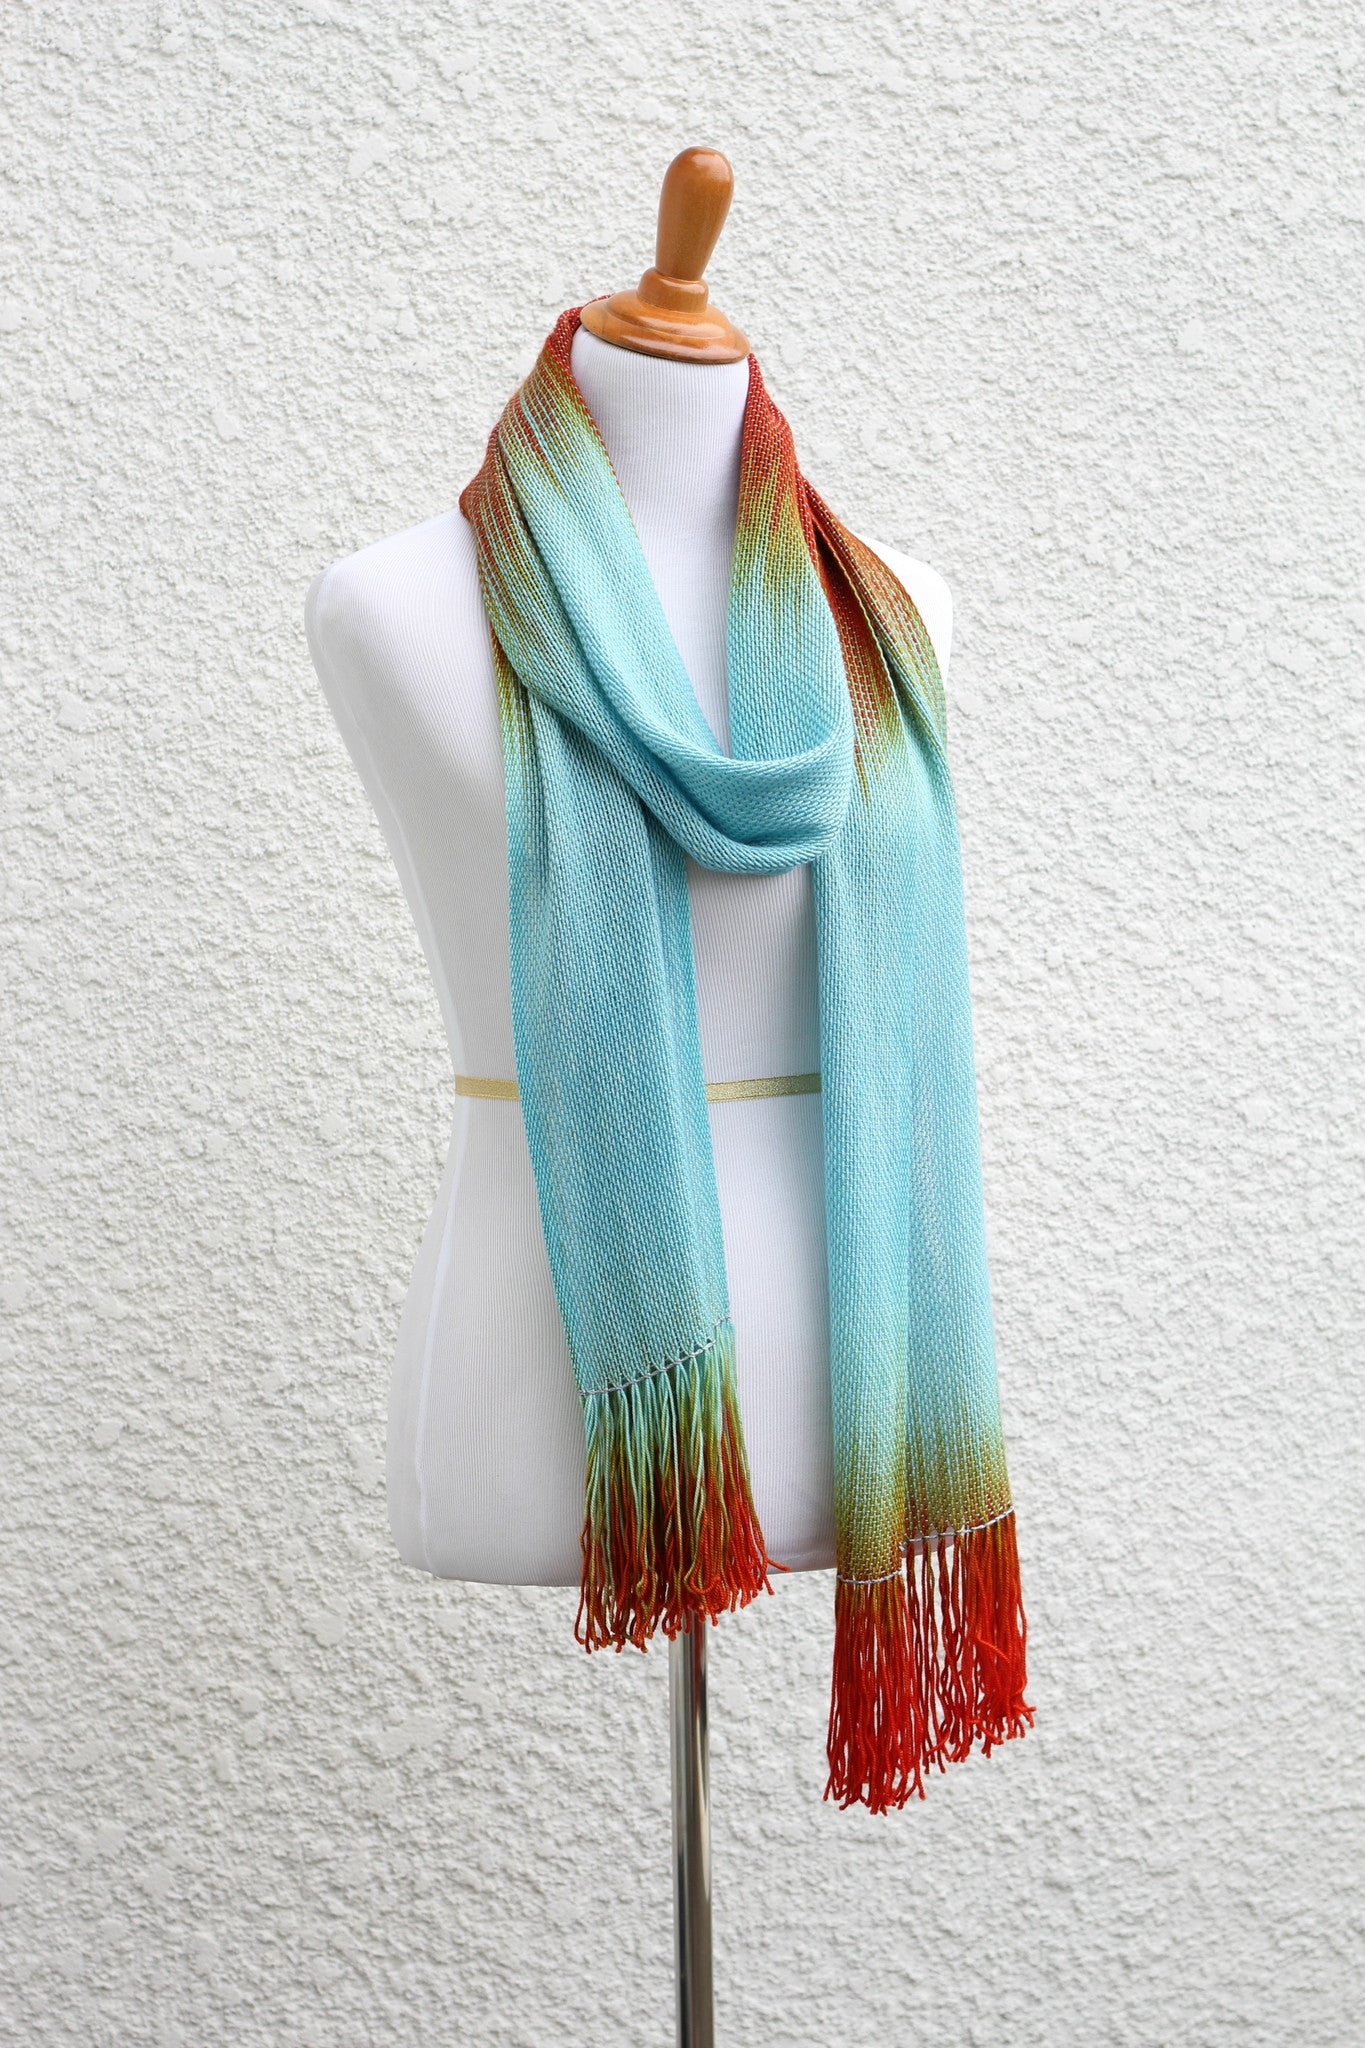 Blue and red scarf